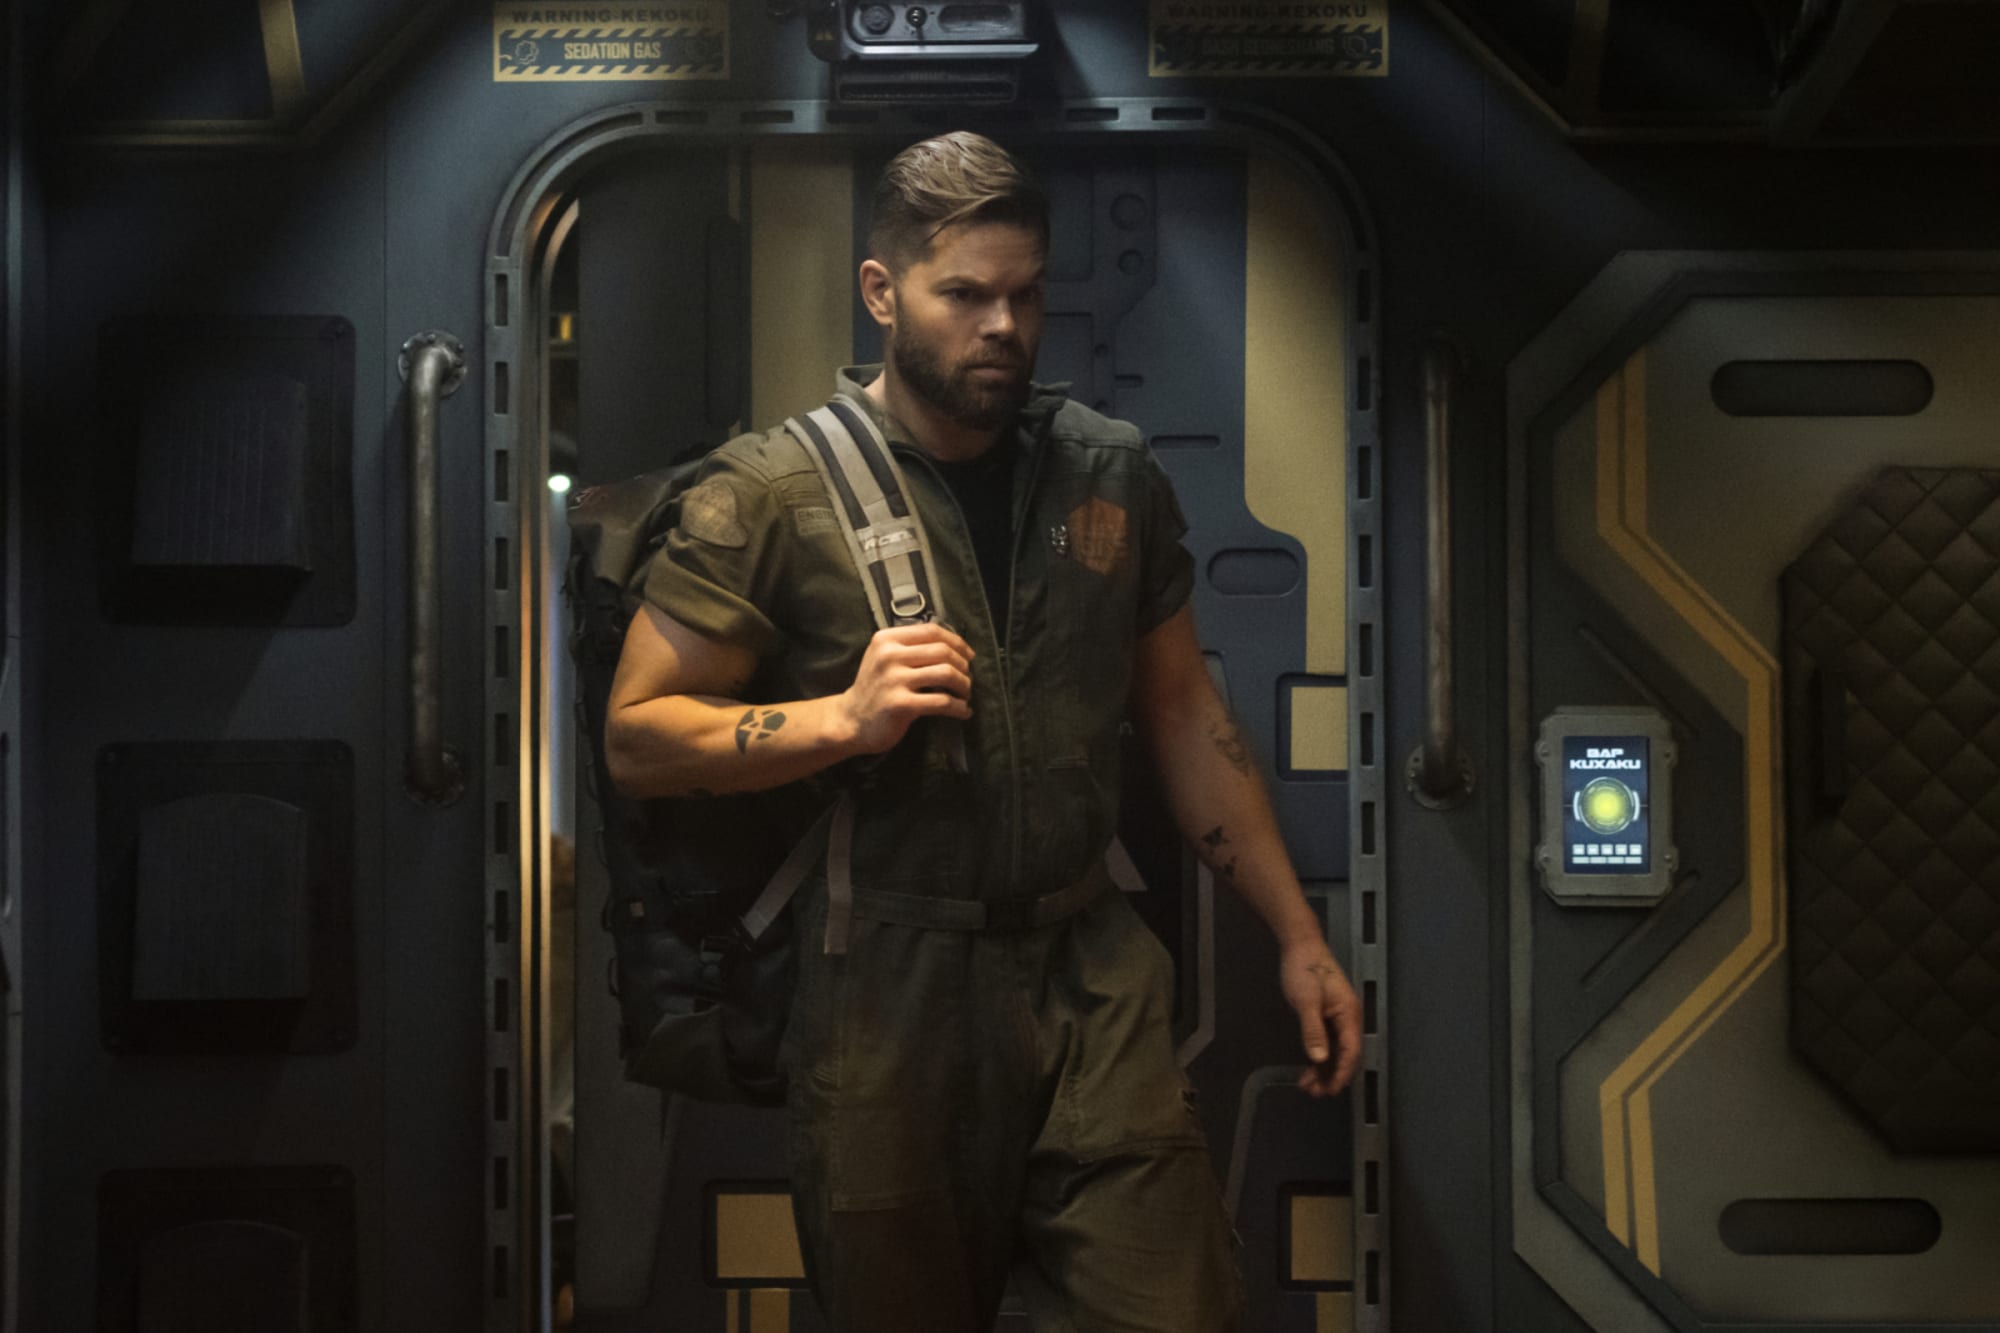 While it is the final season, there’s no doubt that we’re excited to see The Expanse Season 6 story. There’s still a wait for it, th